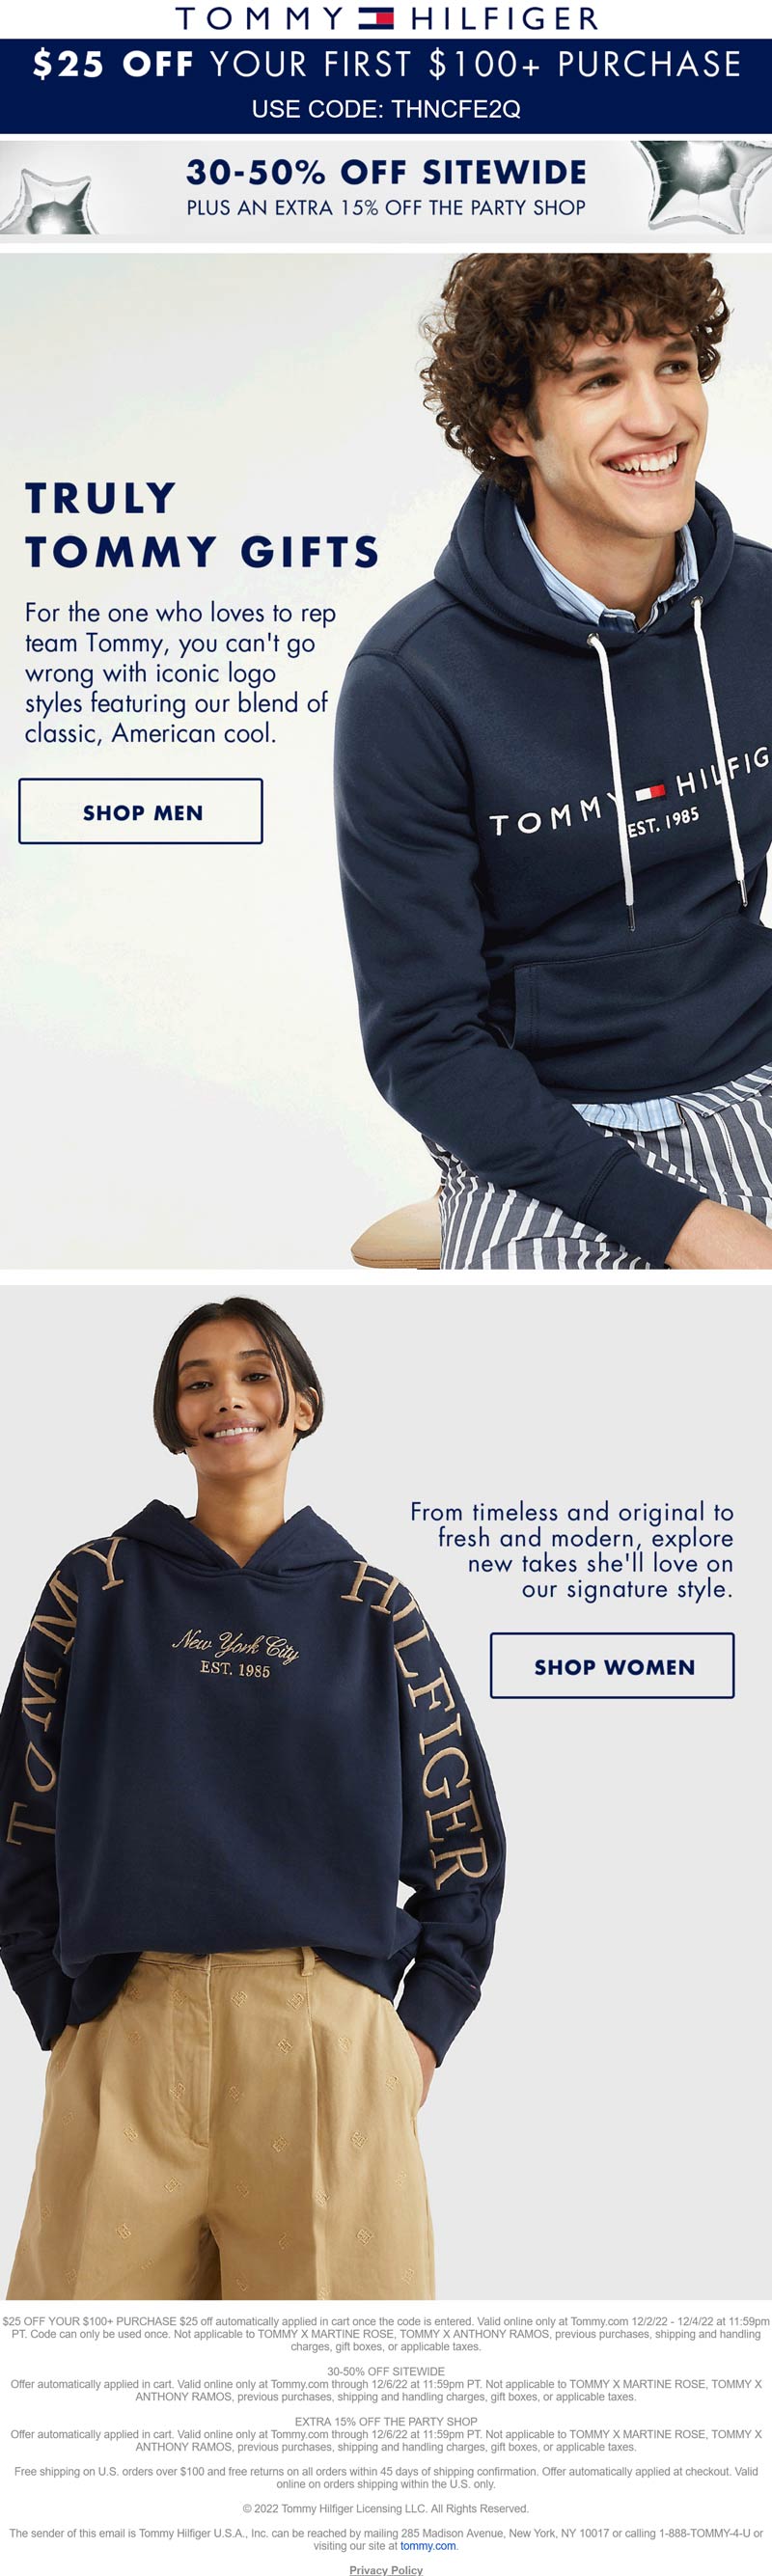 Tommy Hilfiger stores Coupon  30-50% off everything & more online at Tommy Hilfiger #tommyhilfiger 